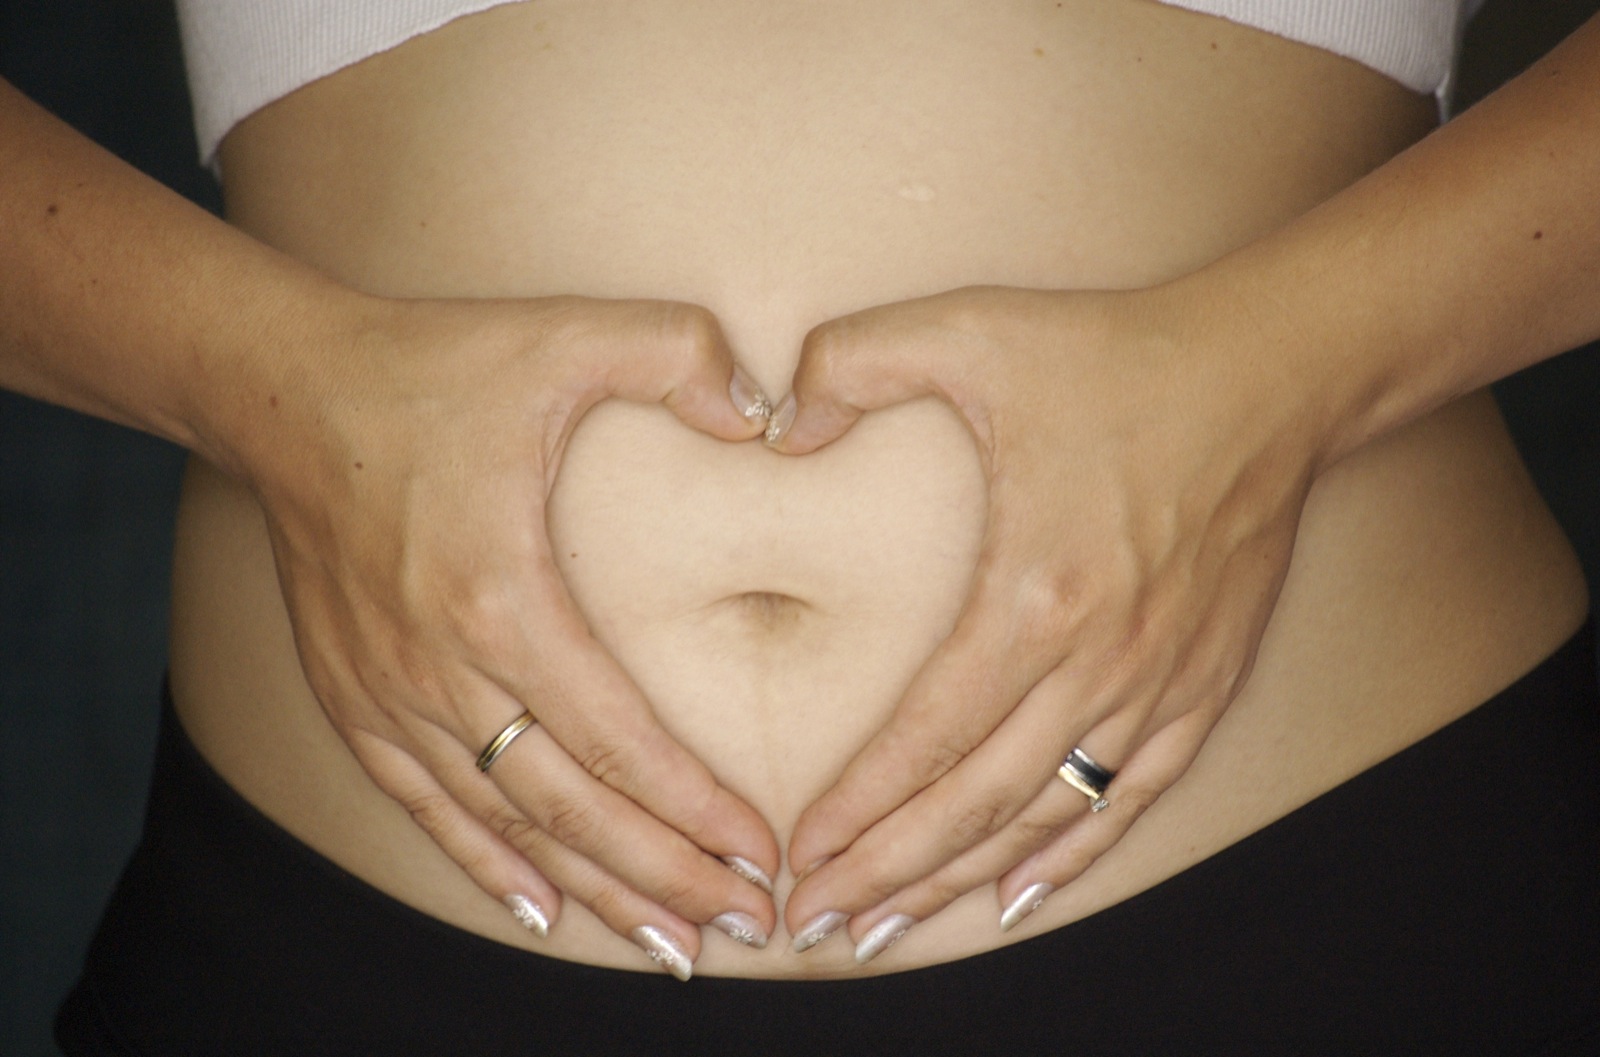 Plant-Powered Pregnancy: How to be a Confident Vegan While Growing a Human